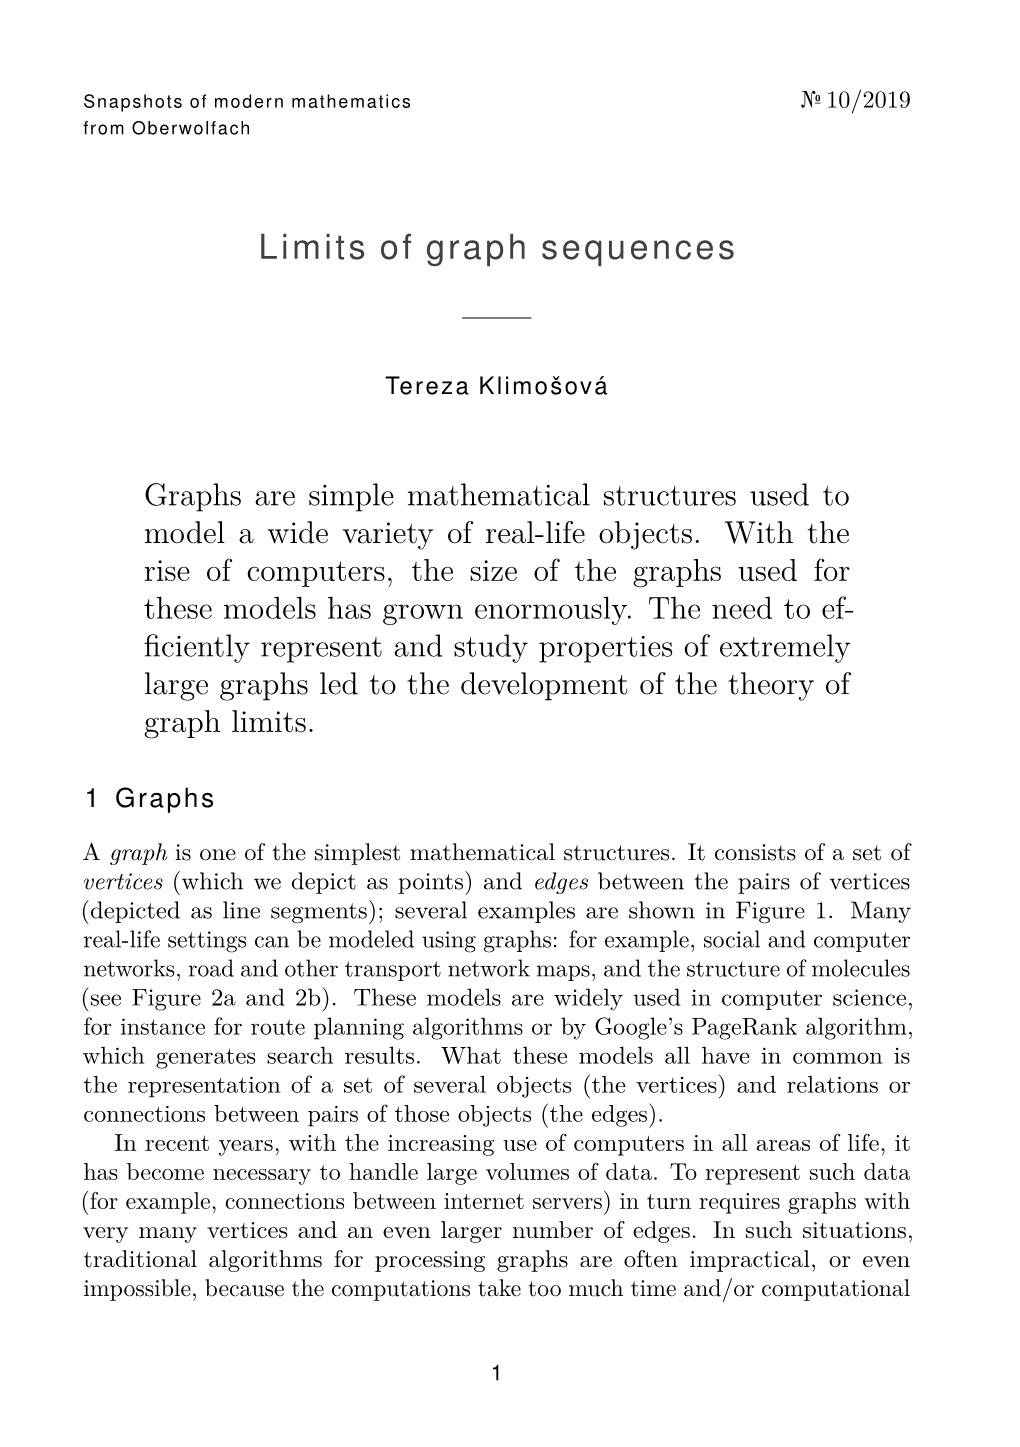 Limits of Graph Sequences